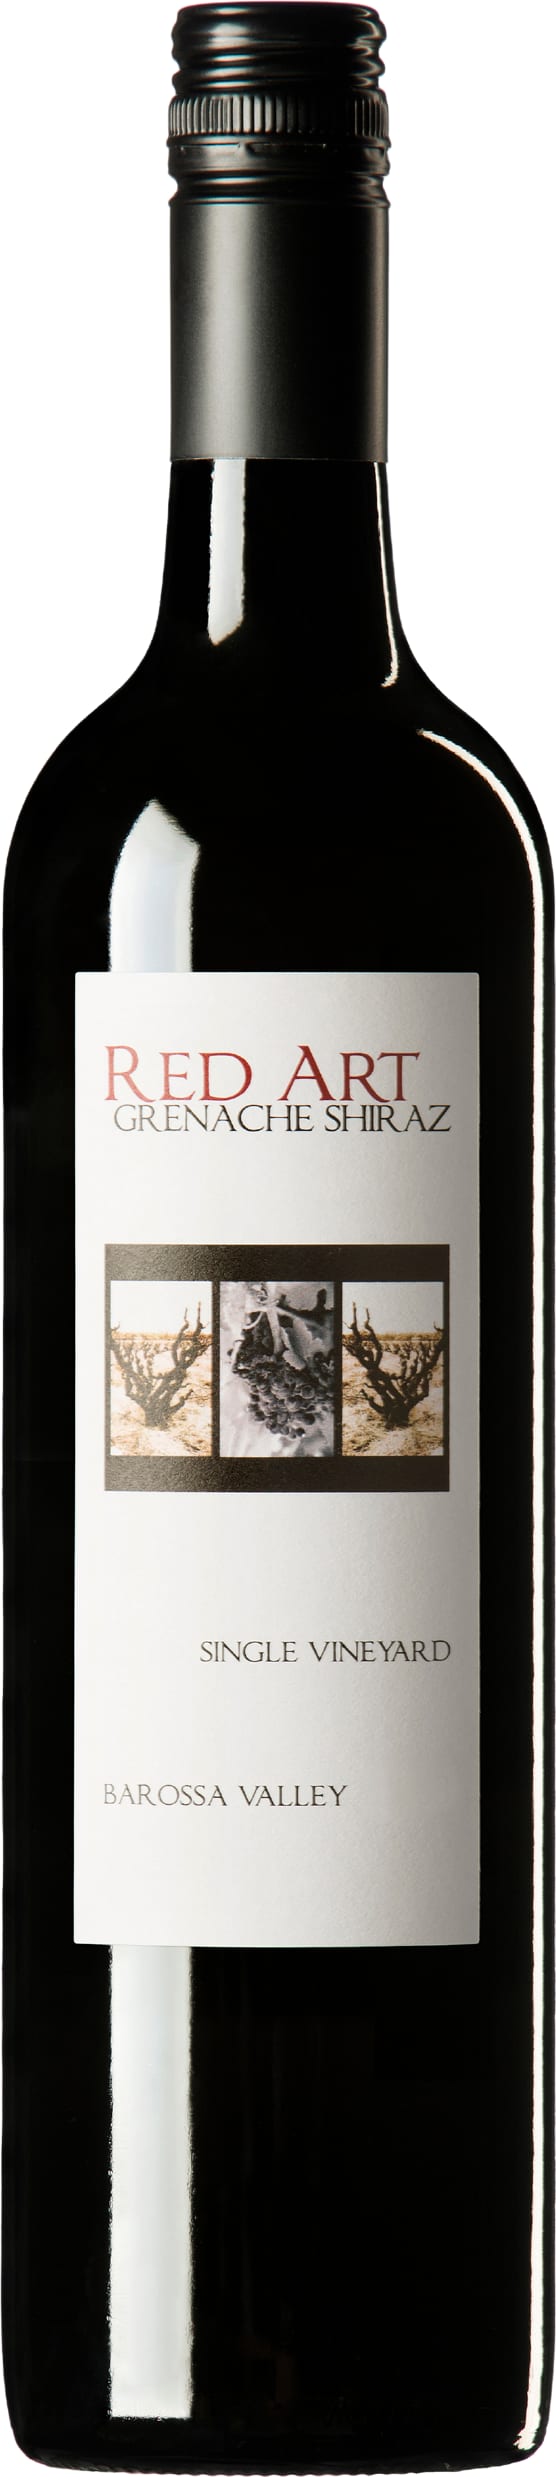 Rojomoma Red Art Grenache Shiraz 2006 75cl - Buy Rojomoma Wines from GREAT WINES DIRECT wine shop